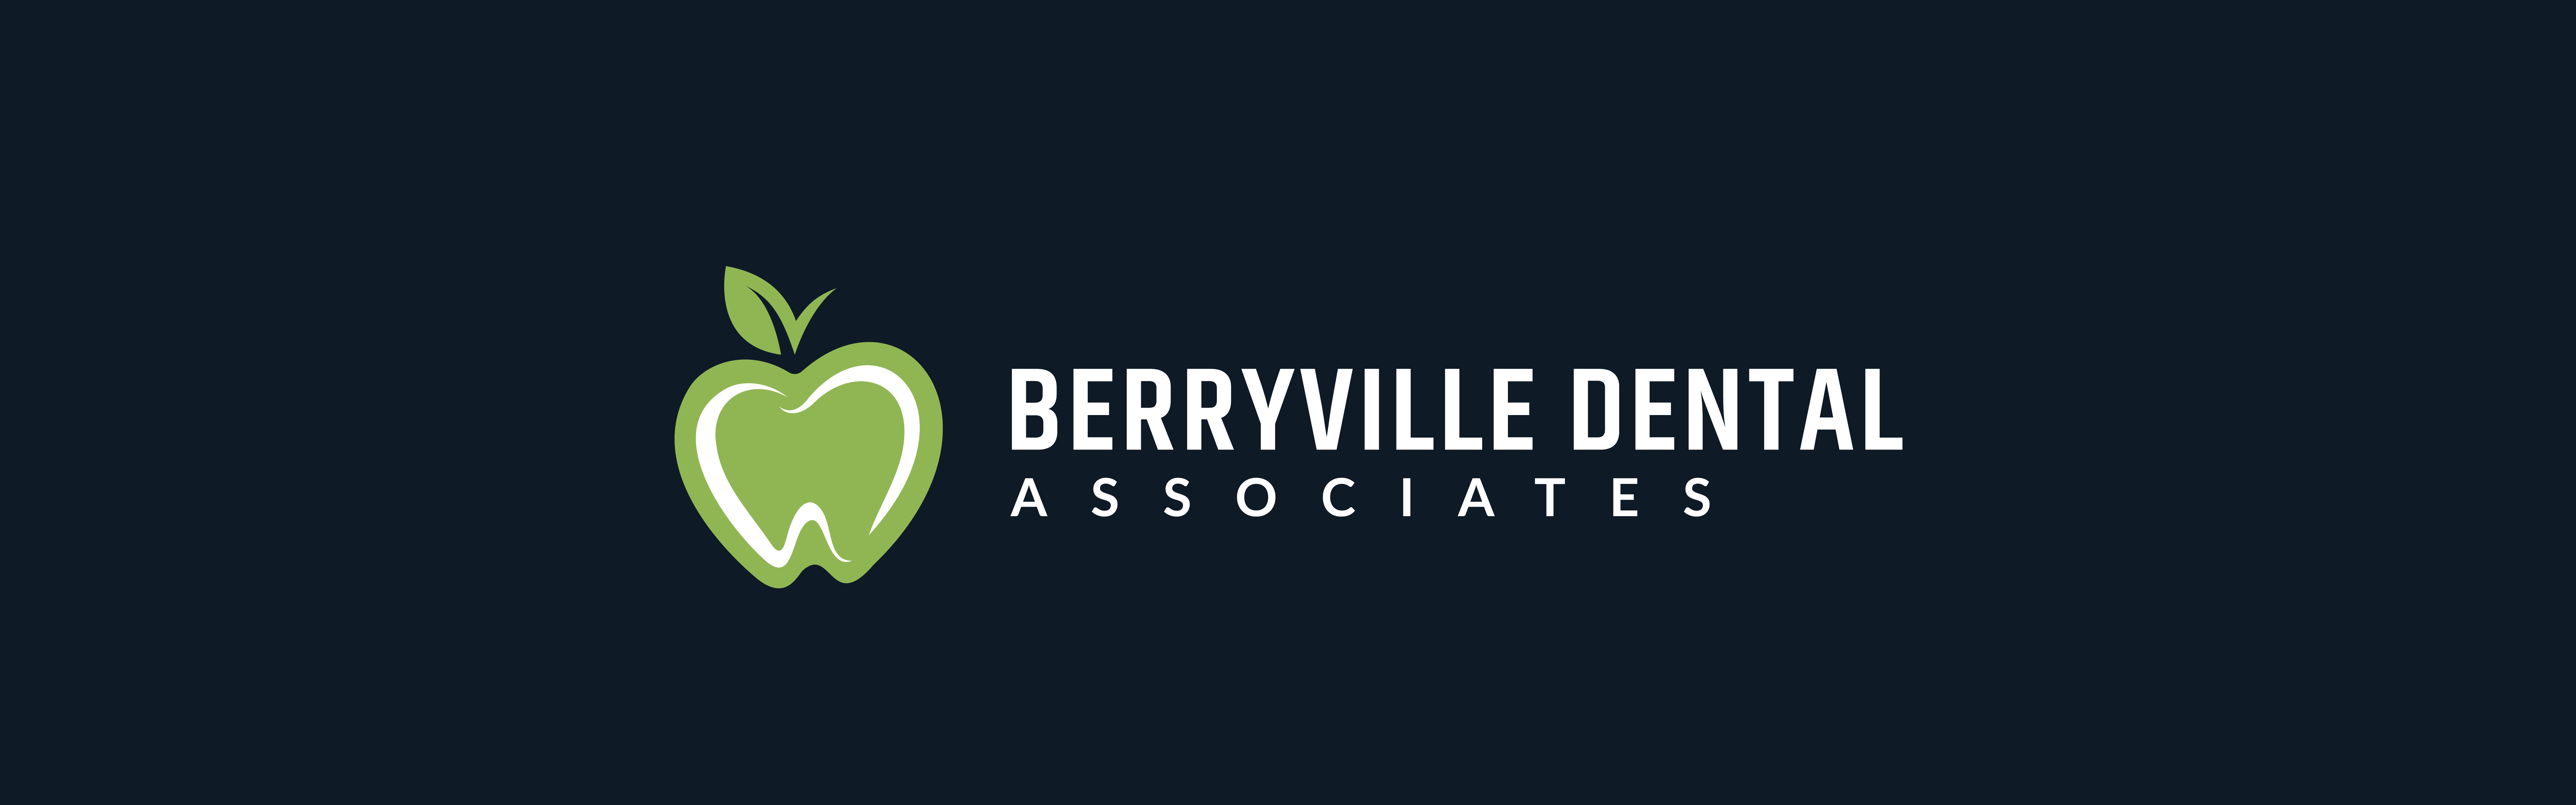 Logo of Berryville Dental Associates, featuring a stylized green apple with a leaf, integrated into a tooth design, set against a dark background with the name of the practice in white and green lettering